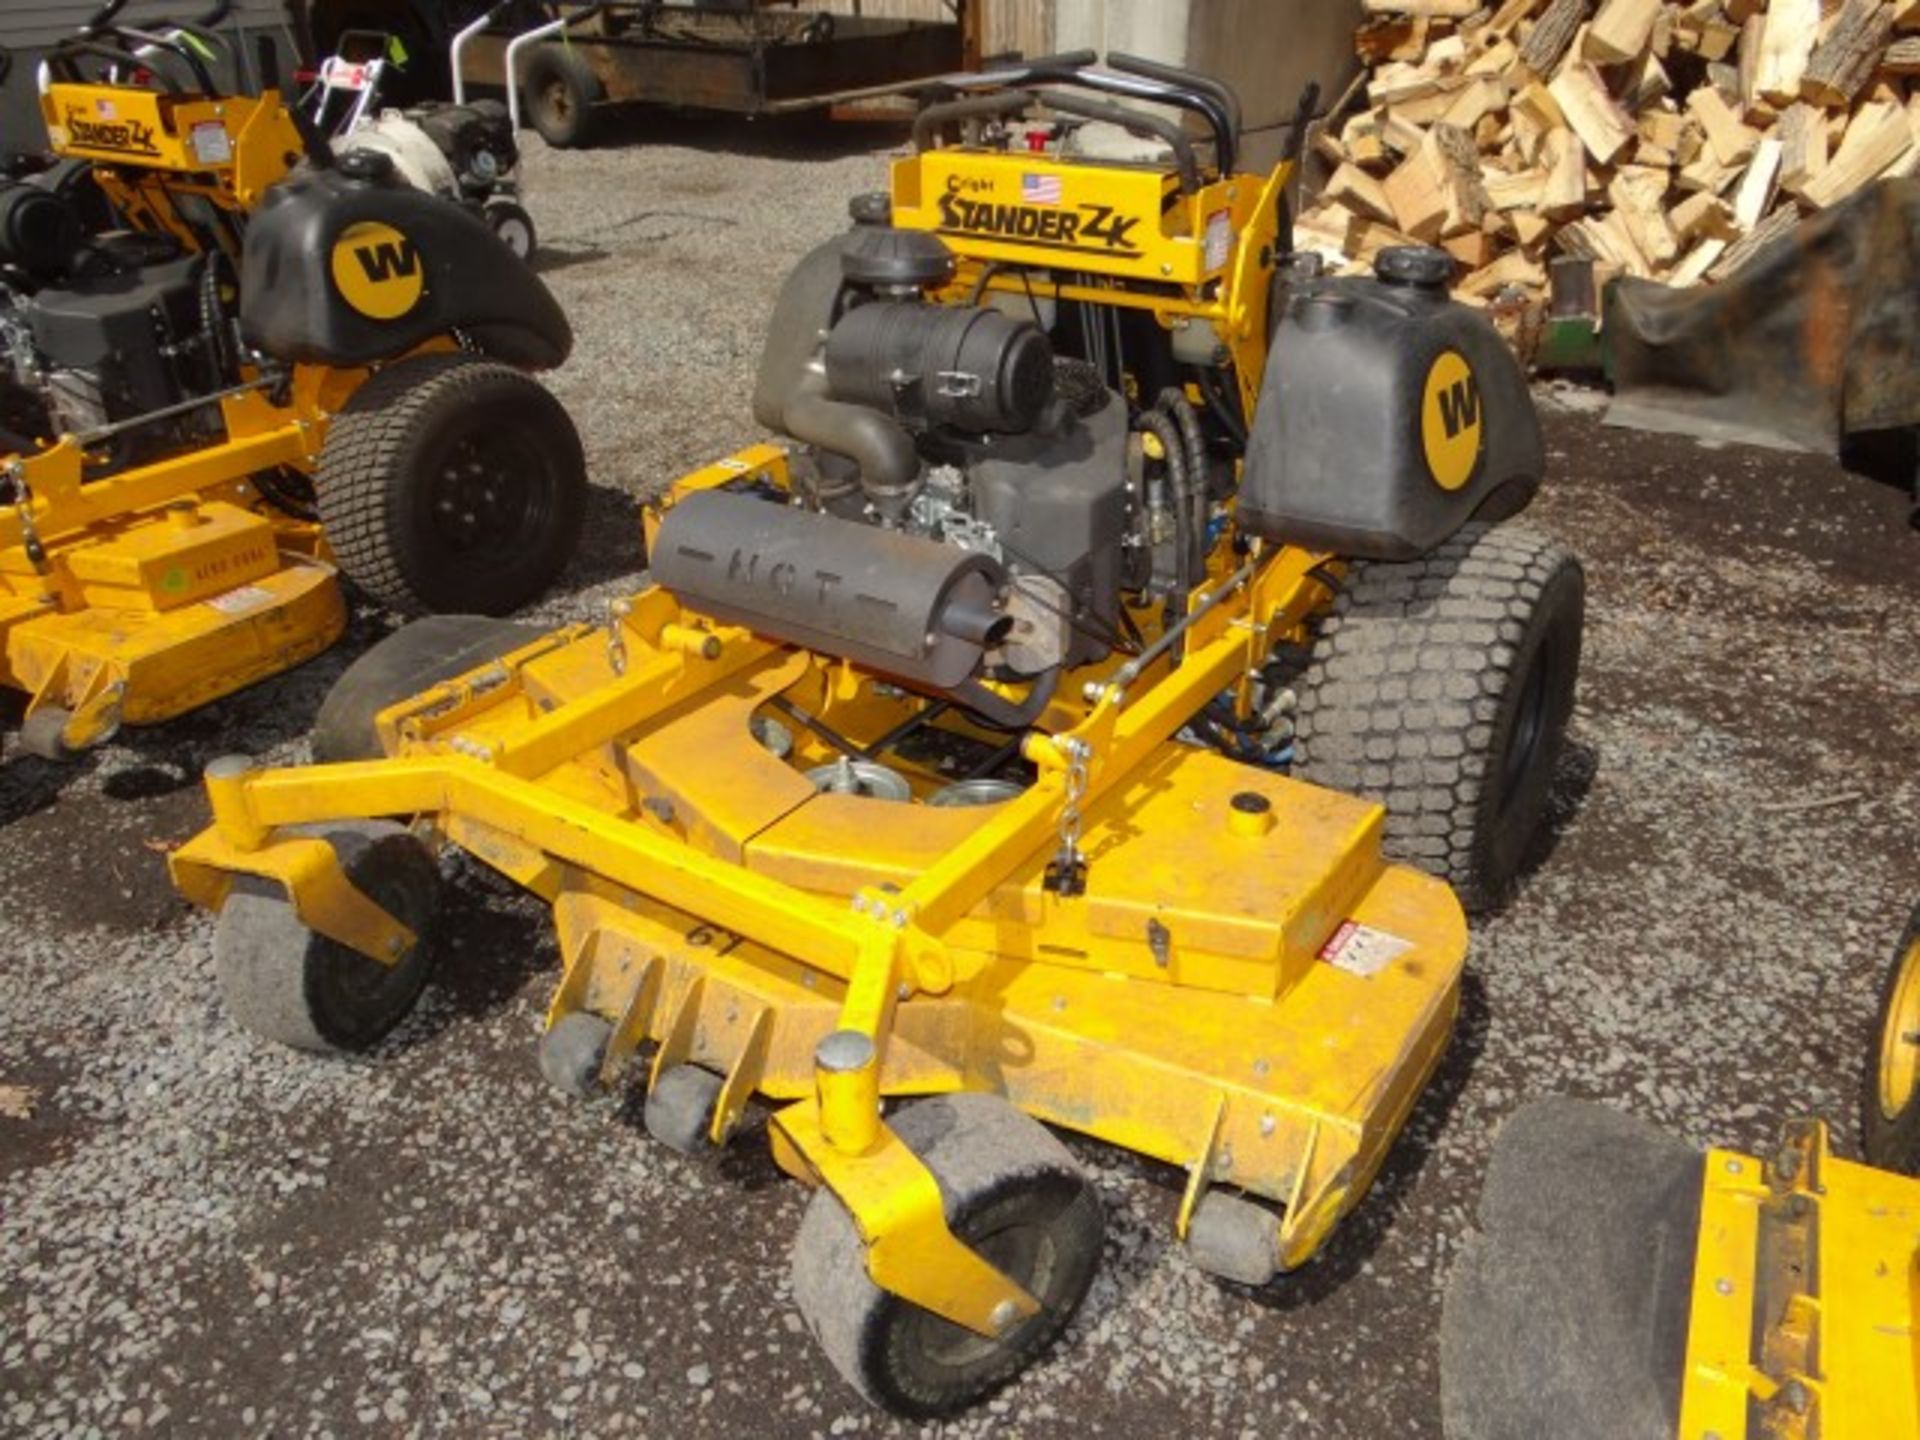 Wright Stander #ZK 61" Stand On Mower, Hrs., 694 - Image 2 of 3